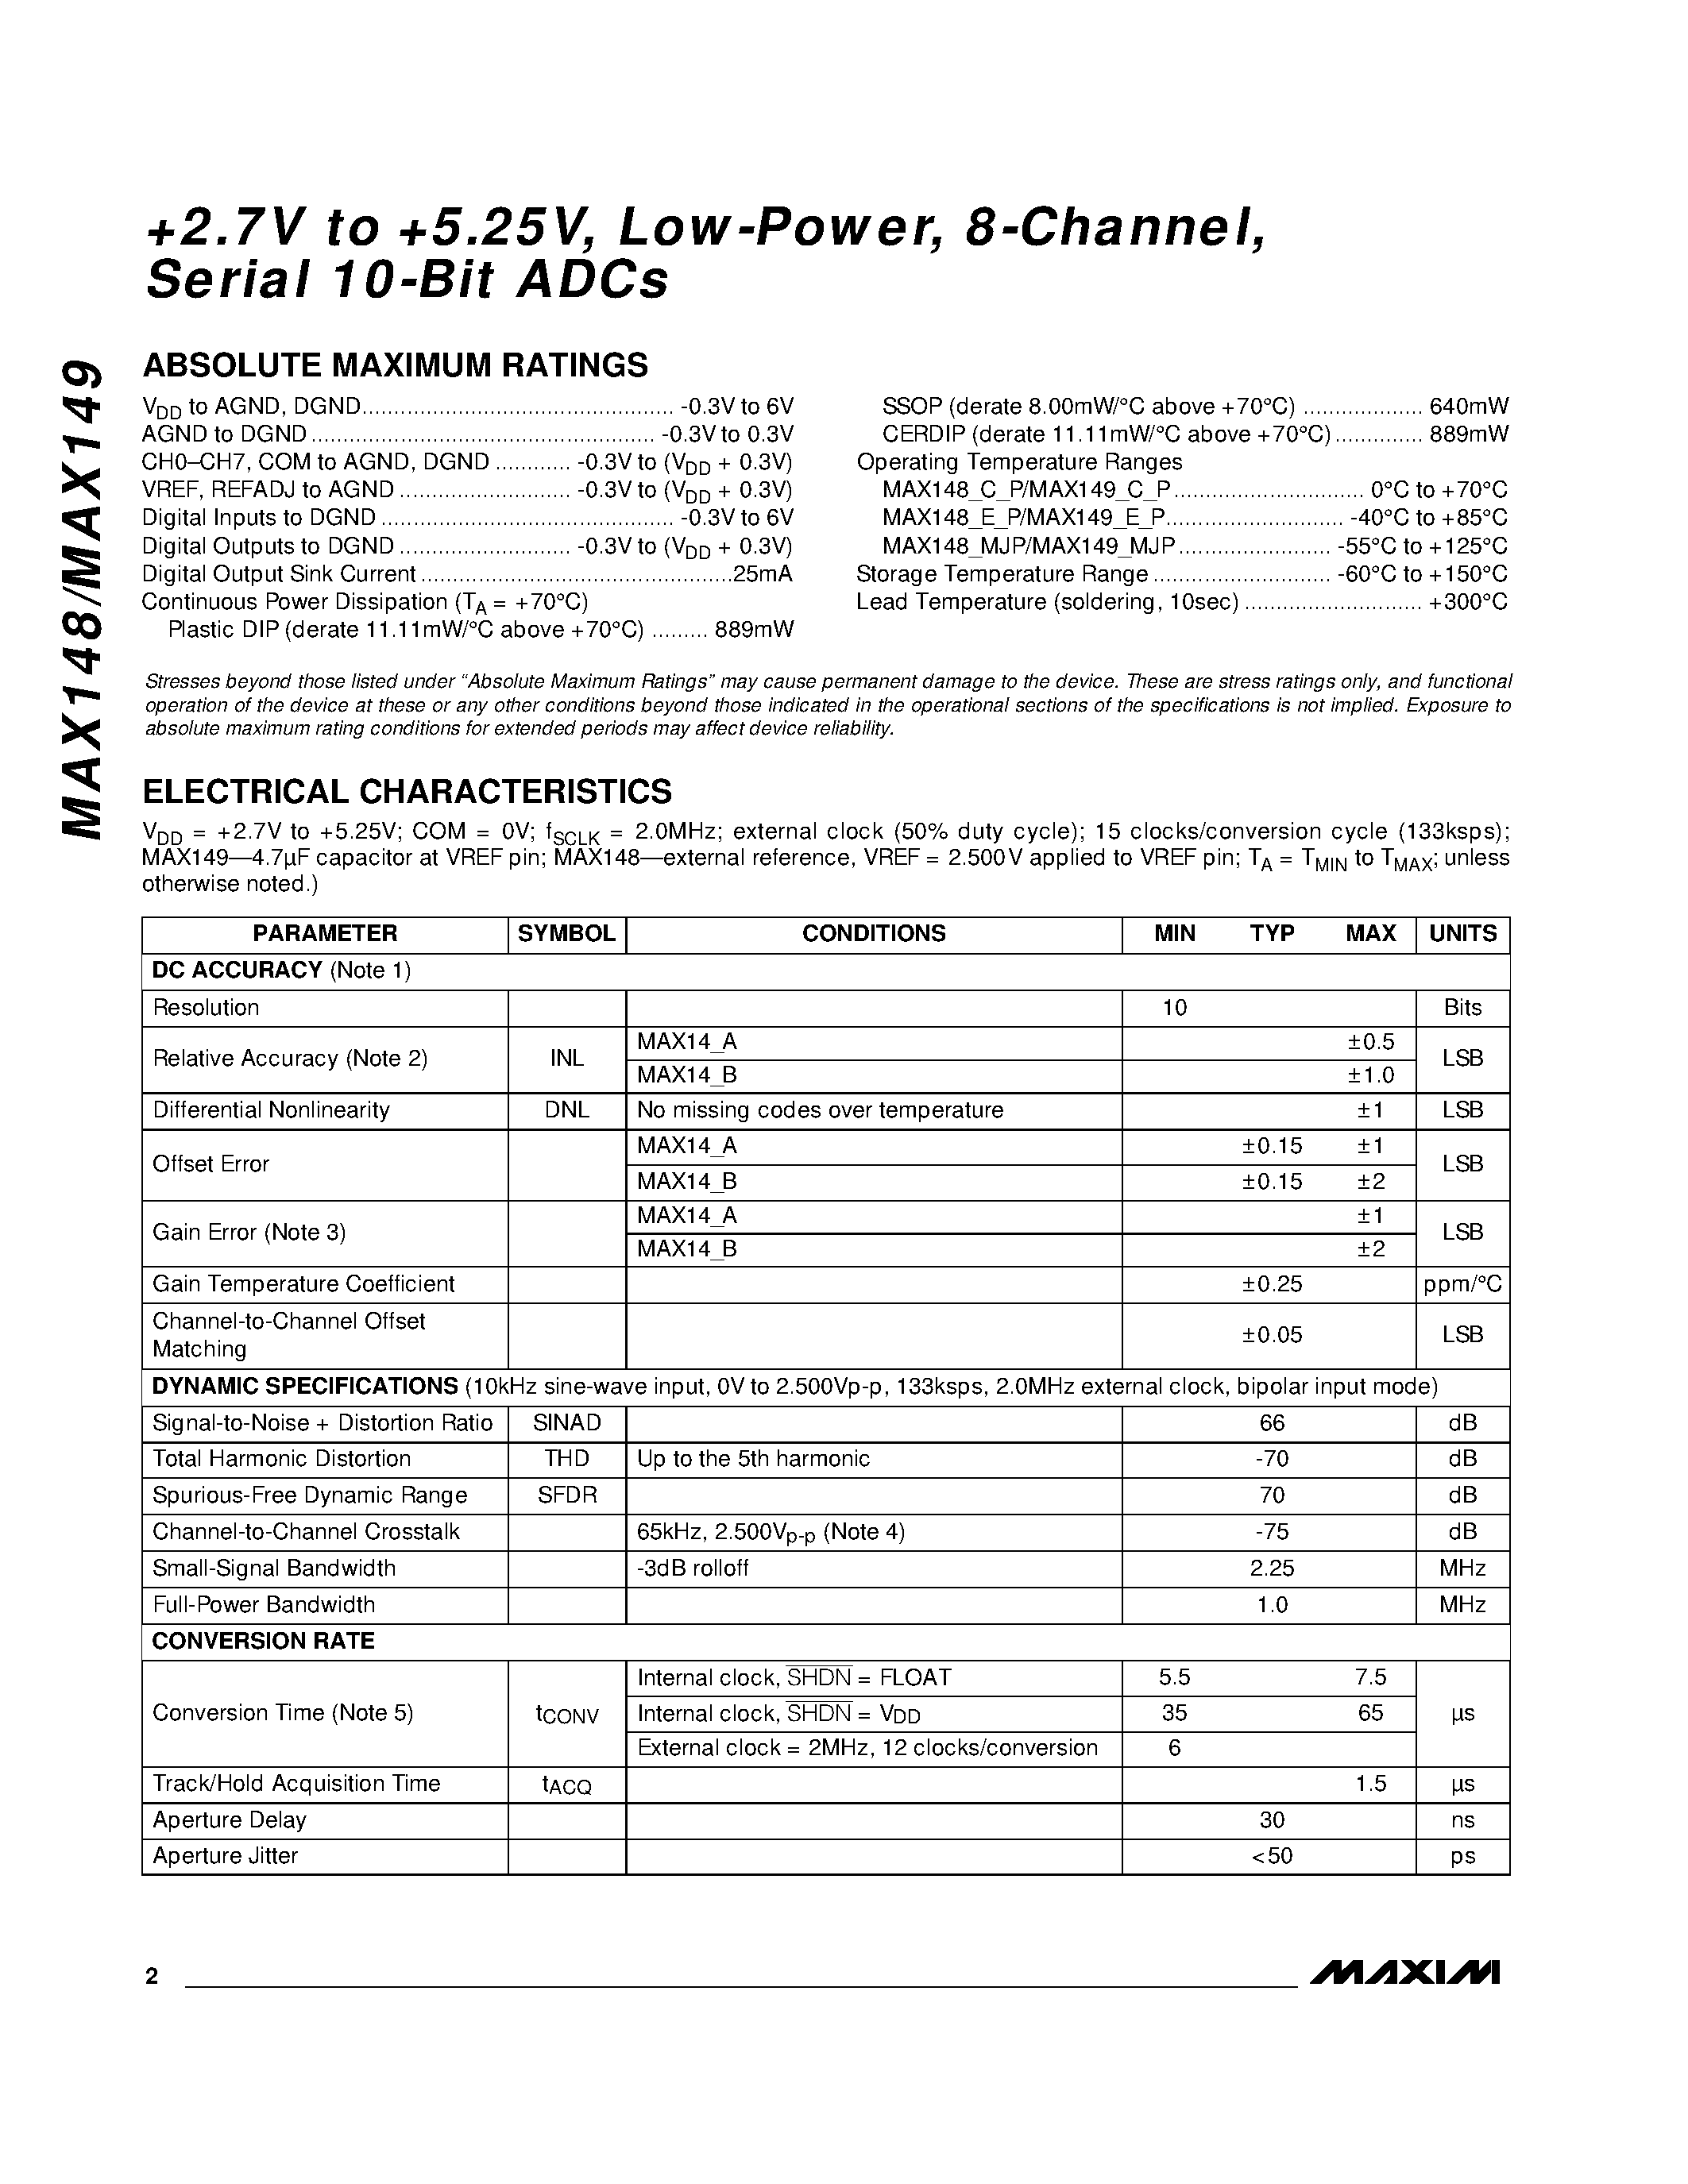 Datasheet MAX148-MAX149 - +2.7V to +5.25V / Low-Power / 8-Channel / Serial 10-Bit ADCs page 2